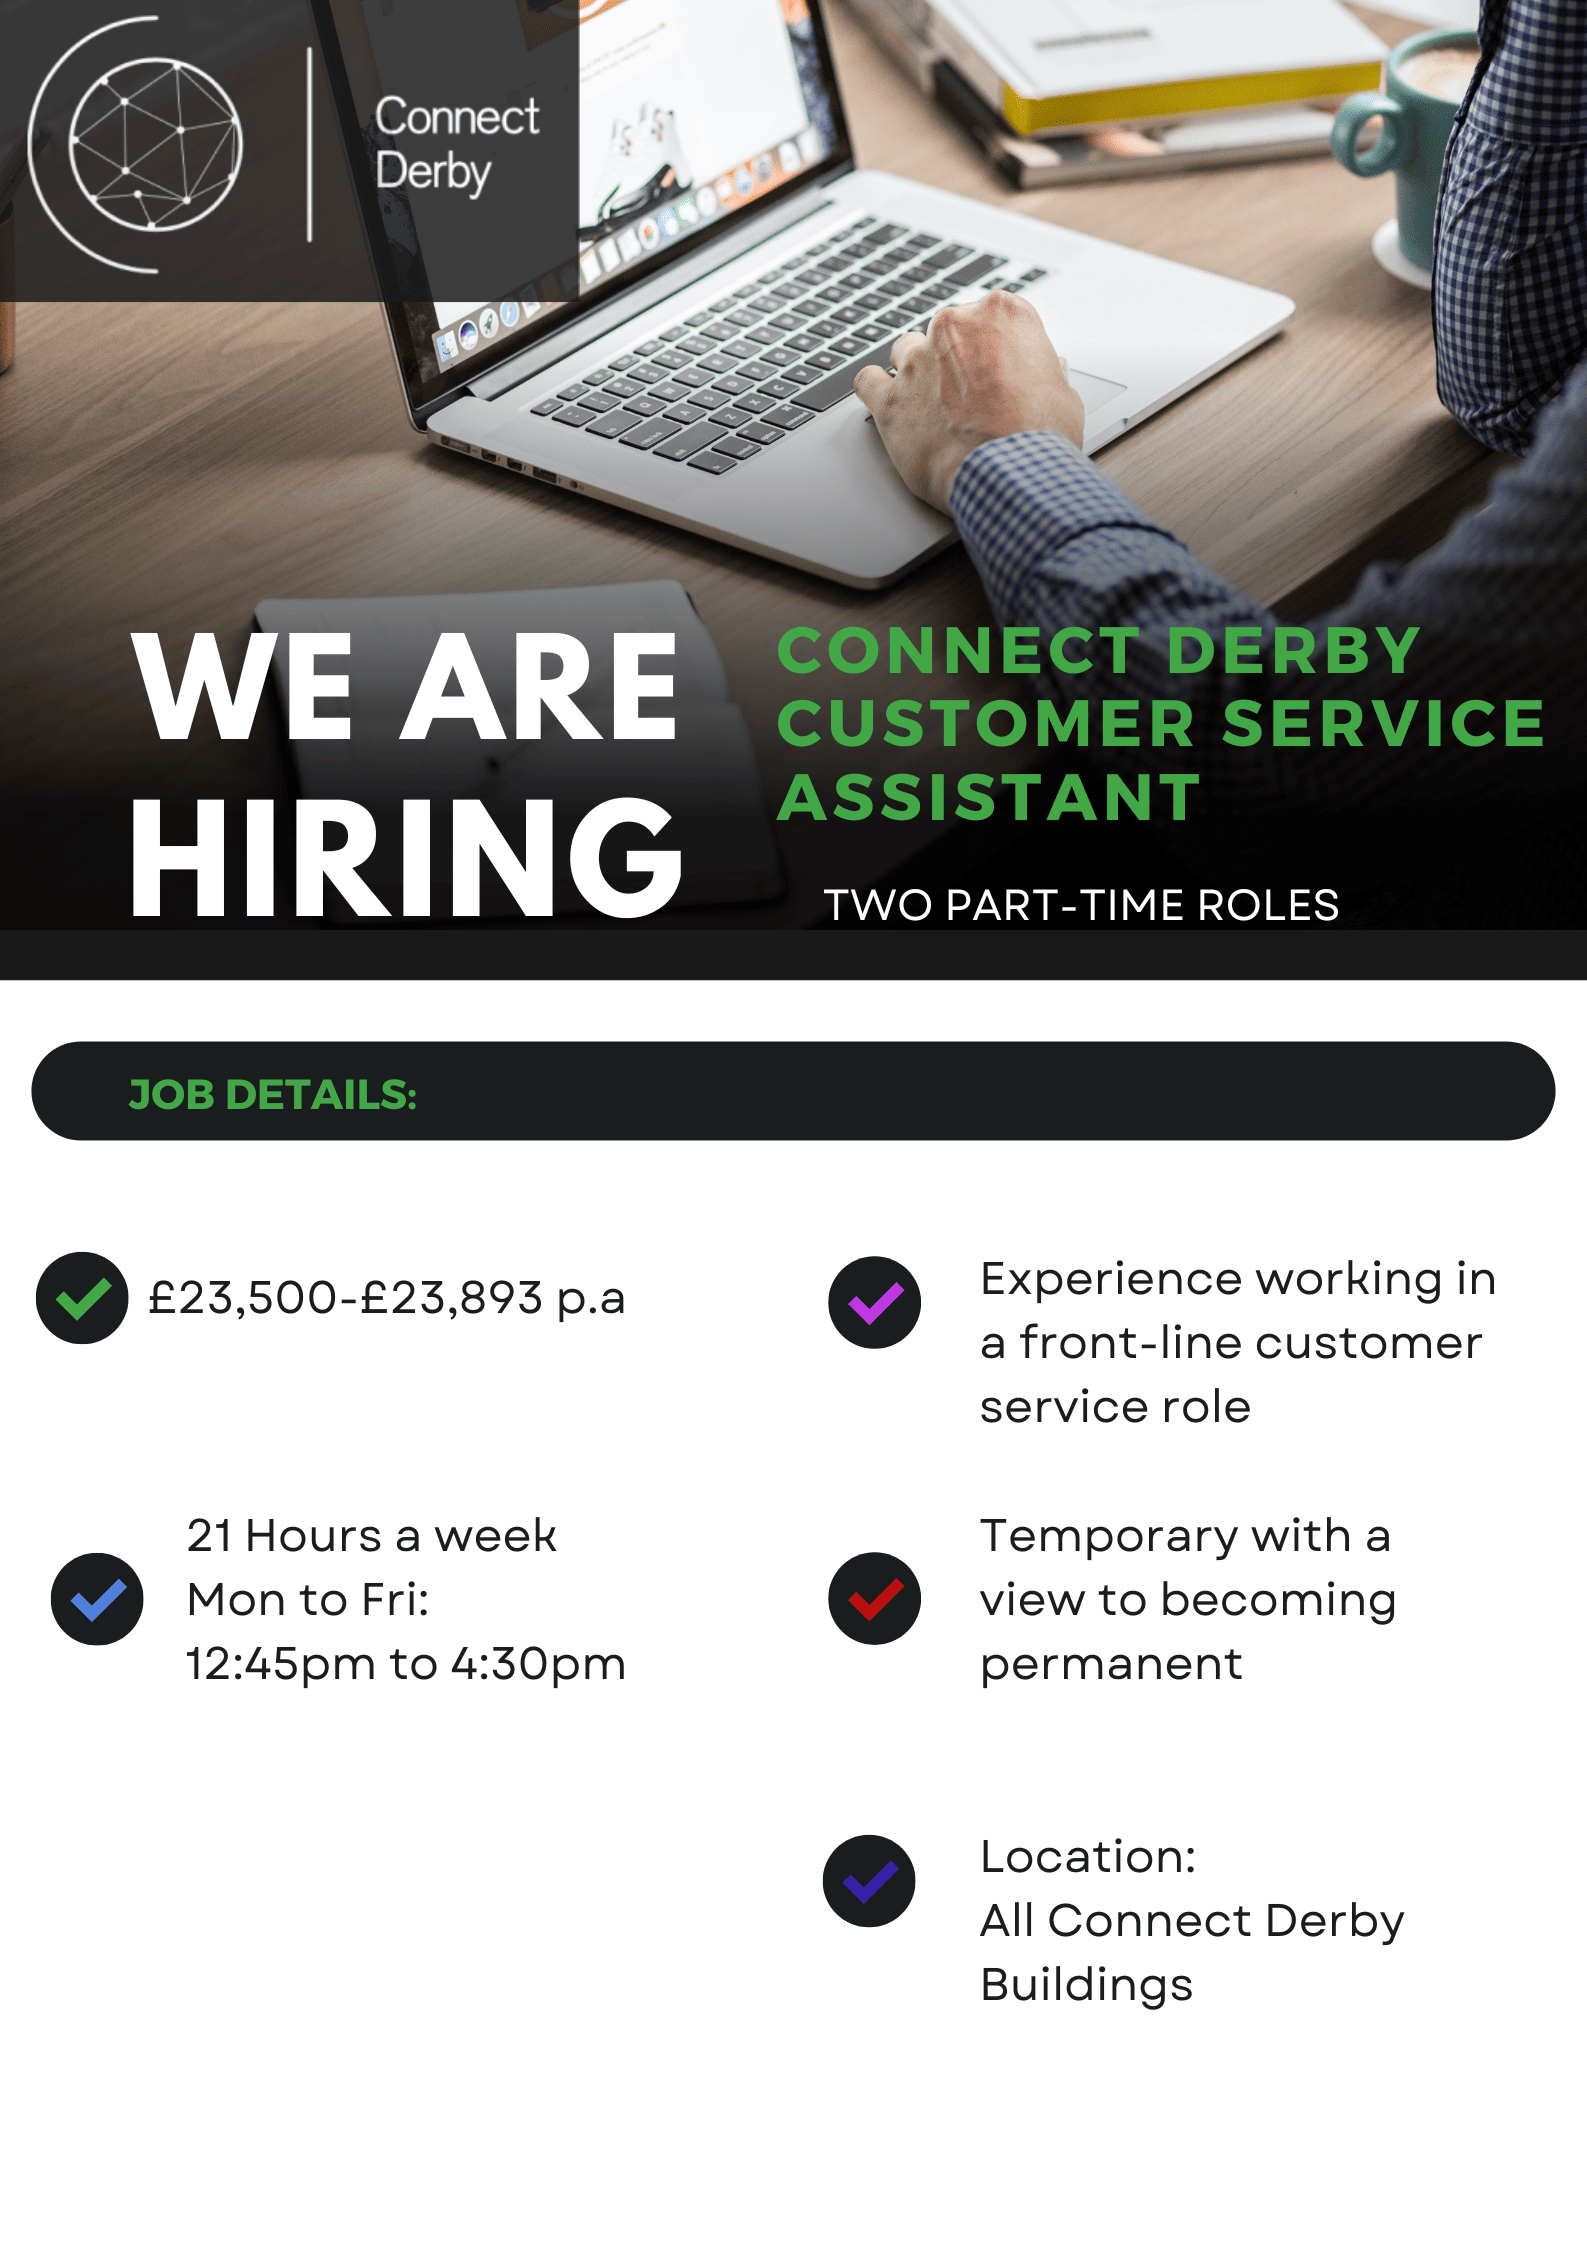 Connect Derby are Hiring Two Part-Time Customer Service Assistants